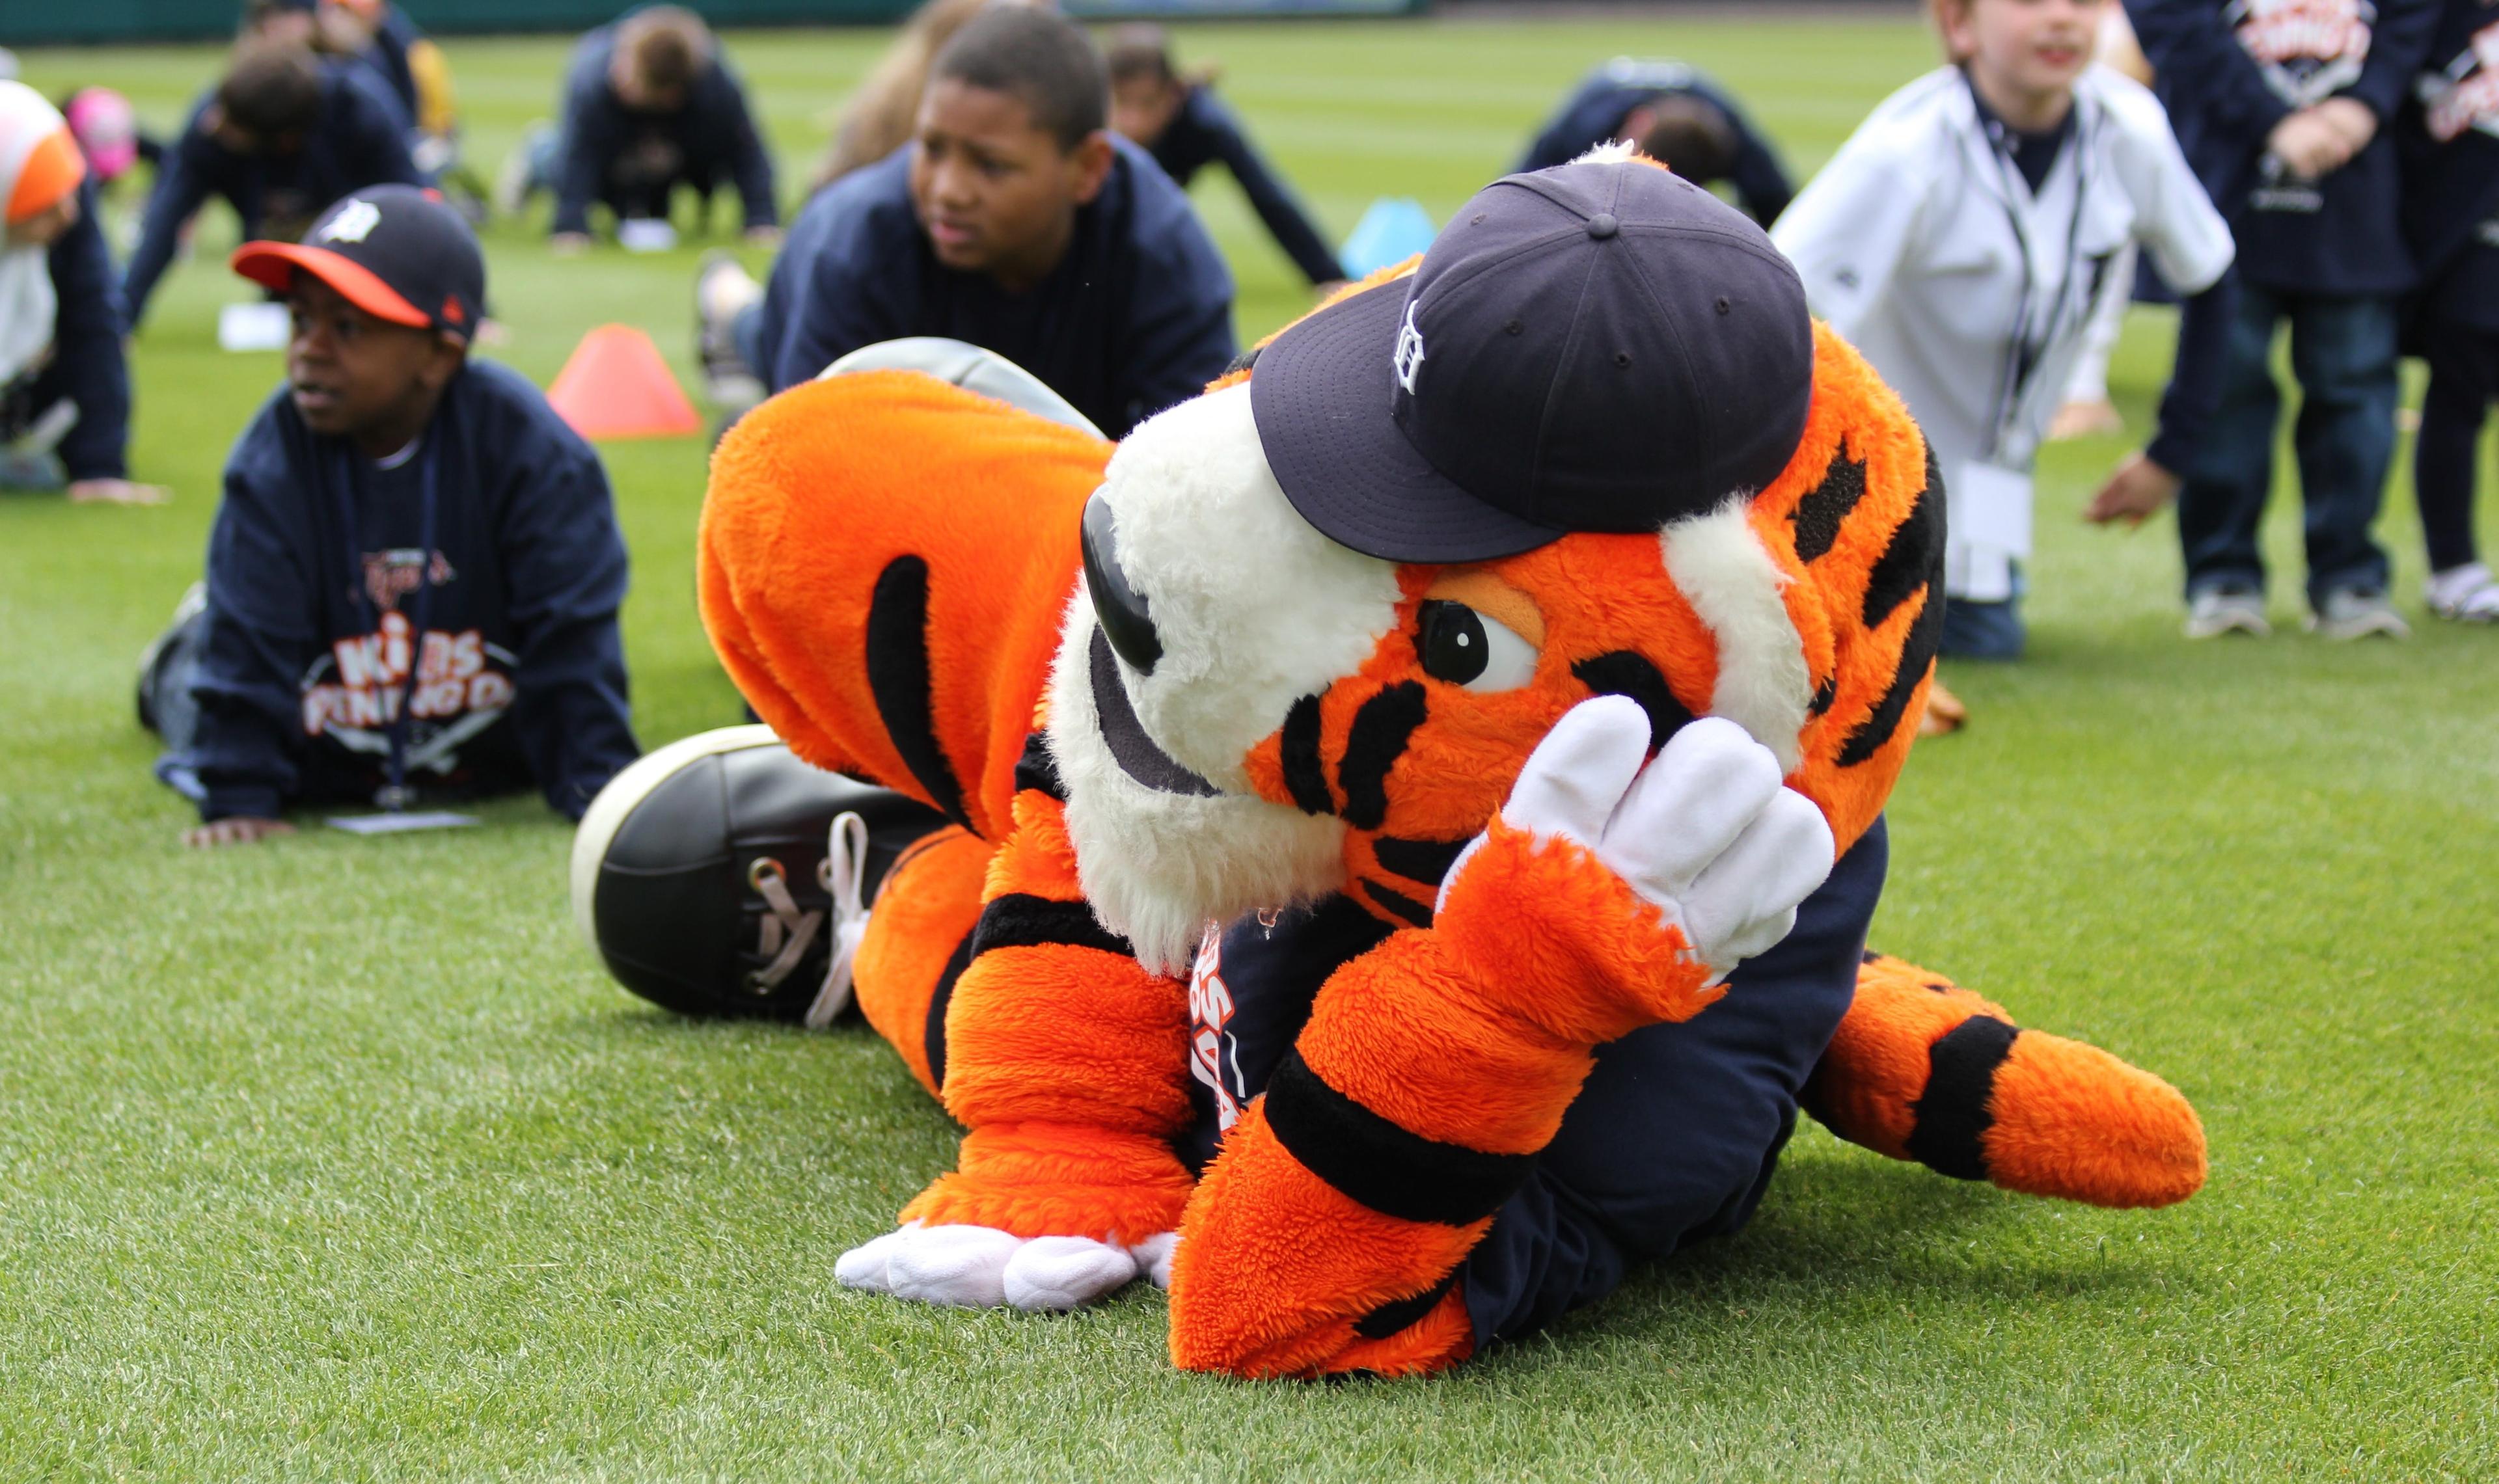 BCBSM and Detroit Tigers Celebrate Children's Health with Annual Kids  Opening Day, Invite Nearly 200 Kids for Special Experience